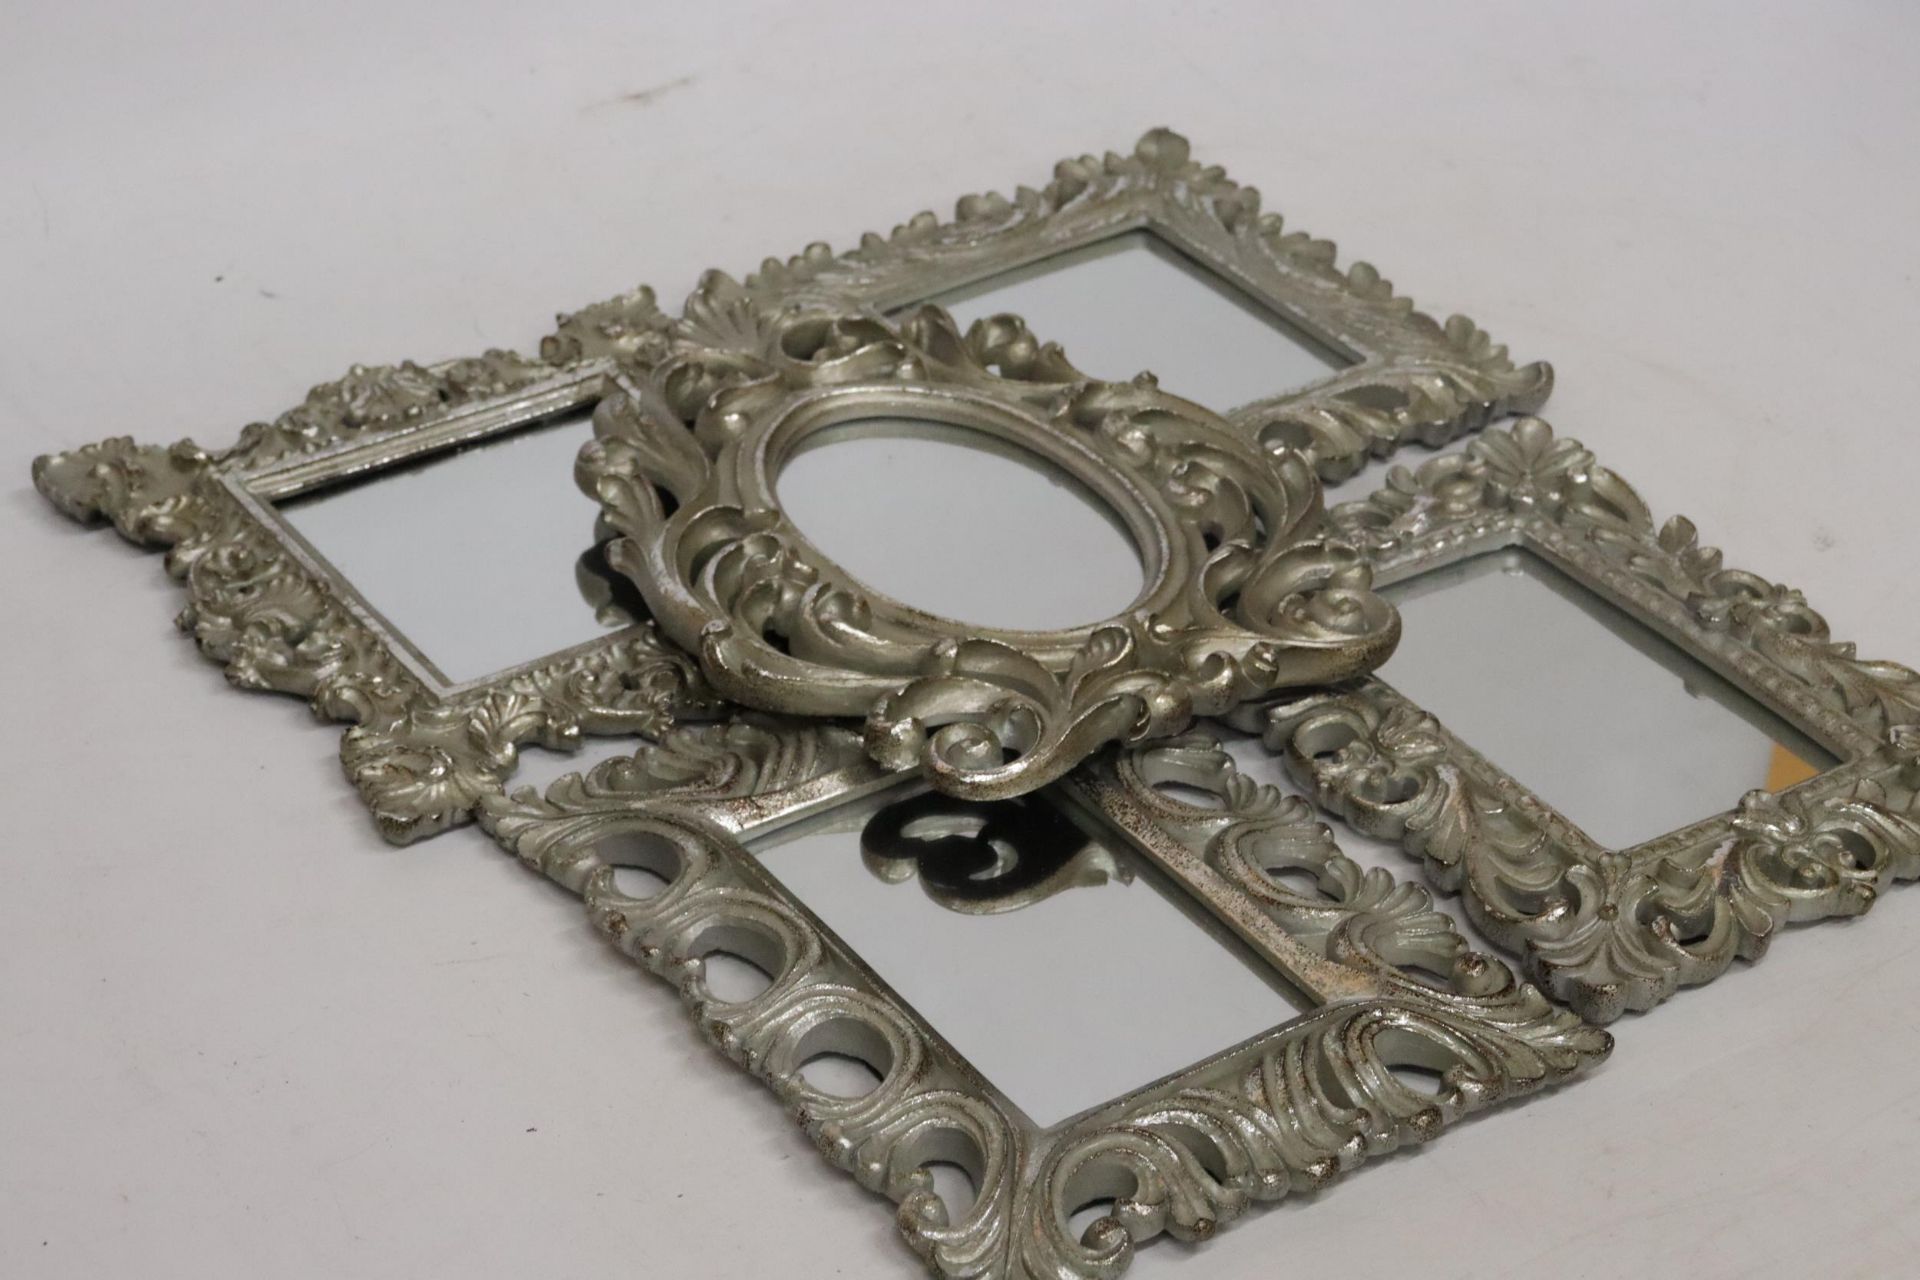 FIVE SMALL MIRRORS WITH ORNATE SILVER COLOURED FRAMES - Image 3 of 9